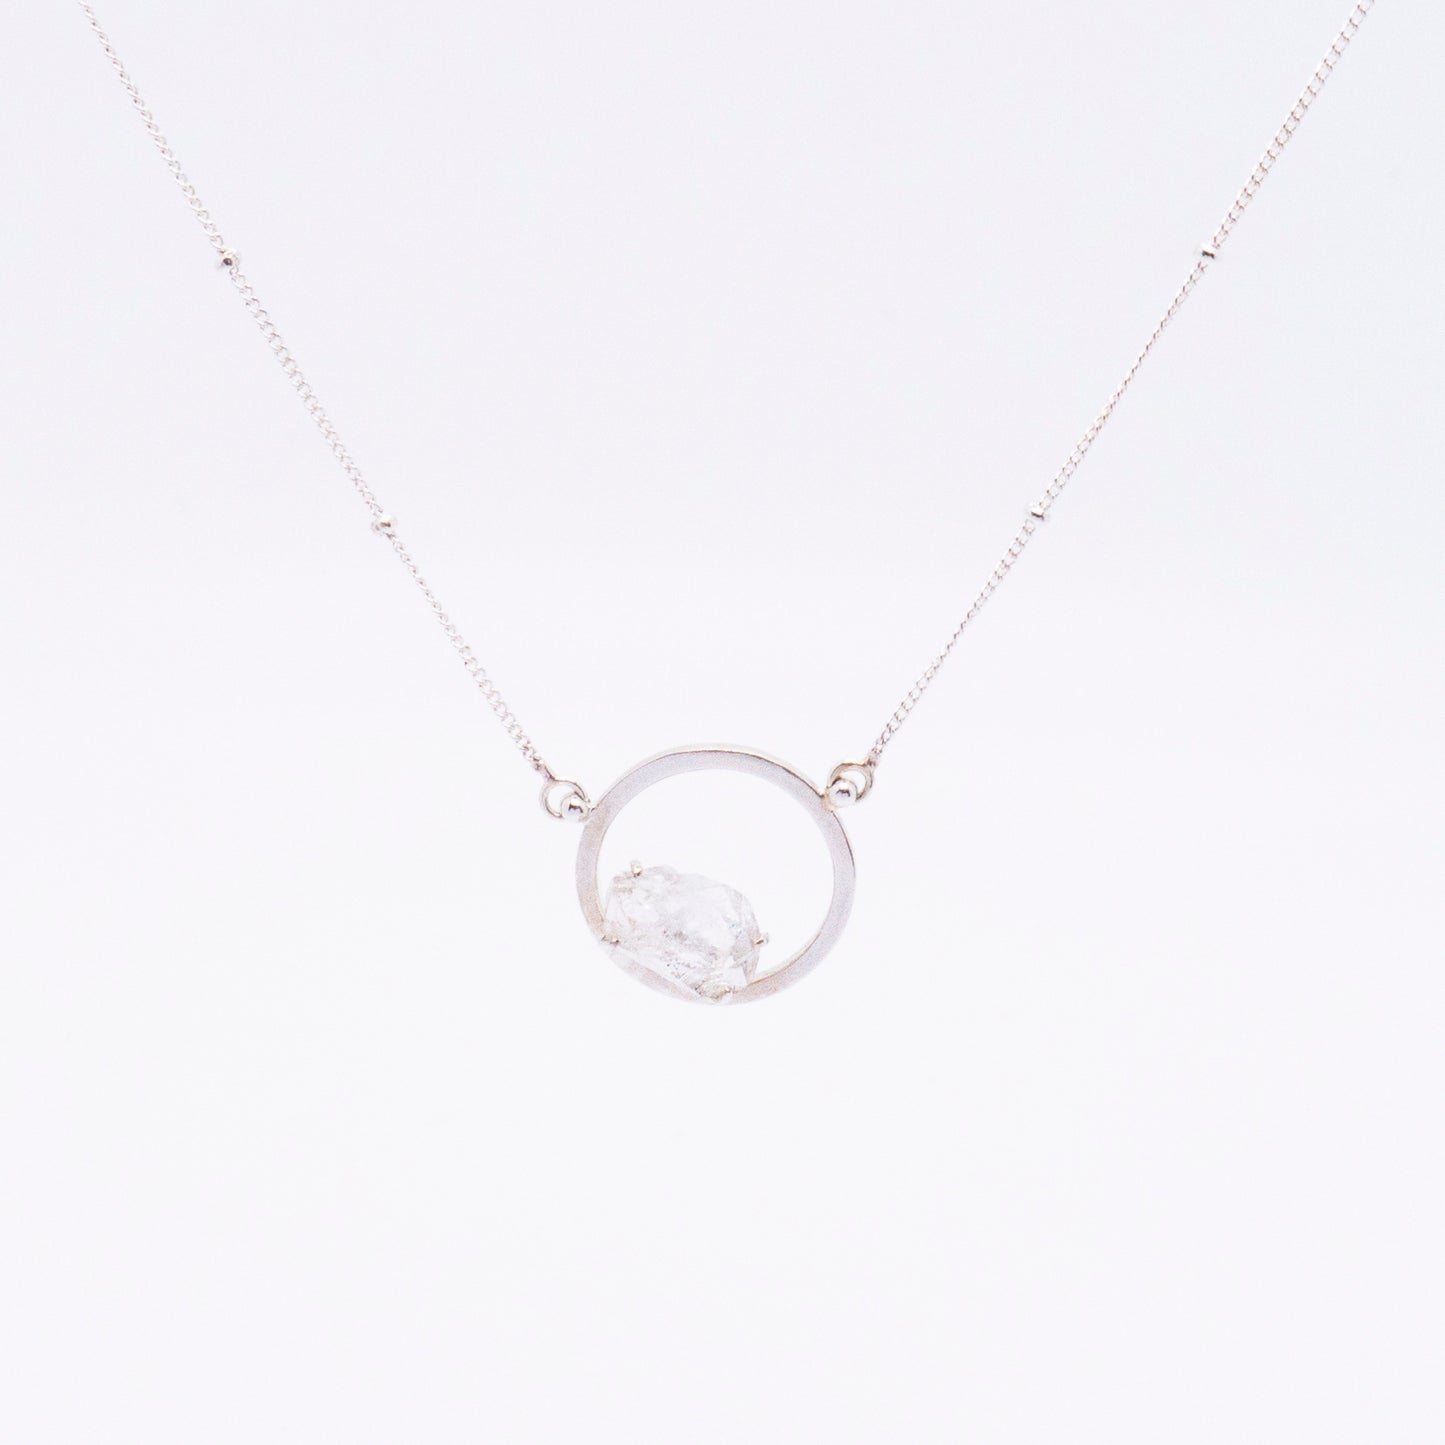 Space Ice - Magenta Mist - Glacial Lake Herkimer Diamond Necklace (Silver)